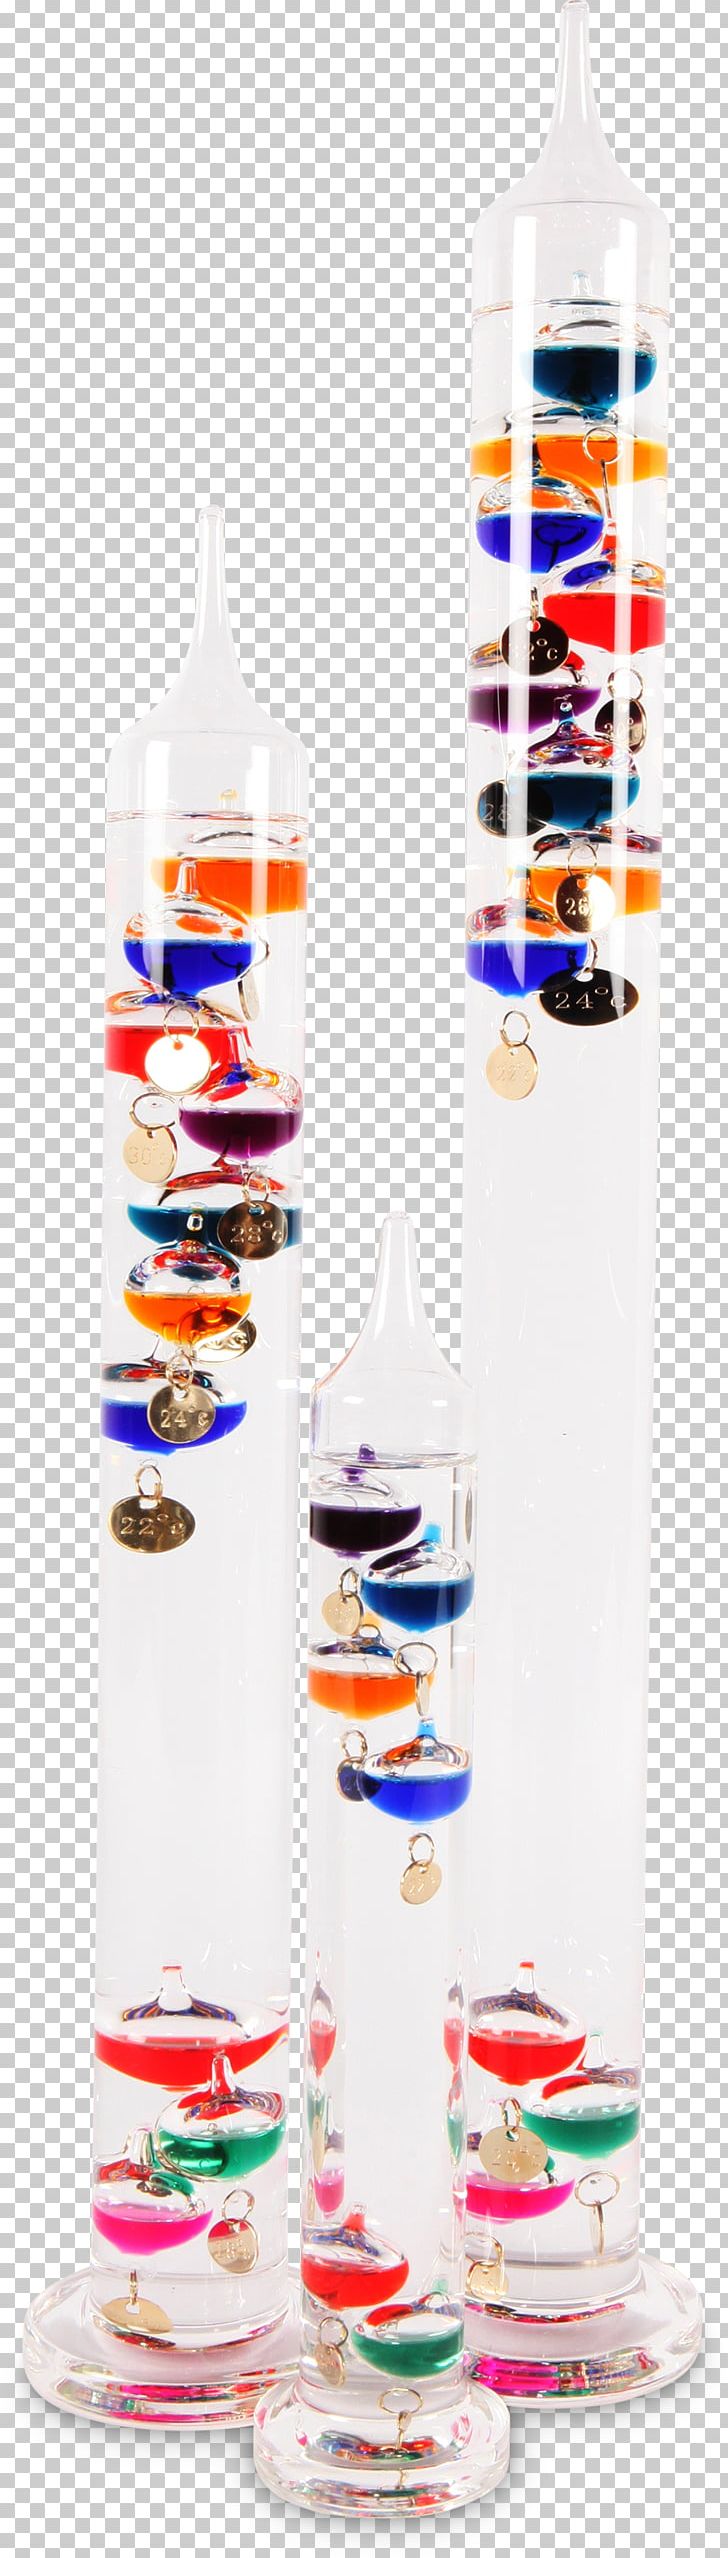 Galileo Thermometer Astronomer Scientist Heliocentrism PNG, Clipart, Astronomer, Bottle, Copernican Heliocentrism, Drinkware, Fantasy Free PNG Download